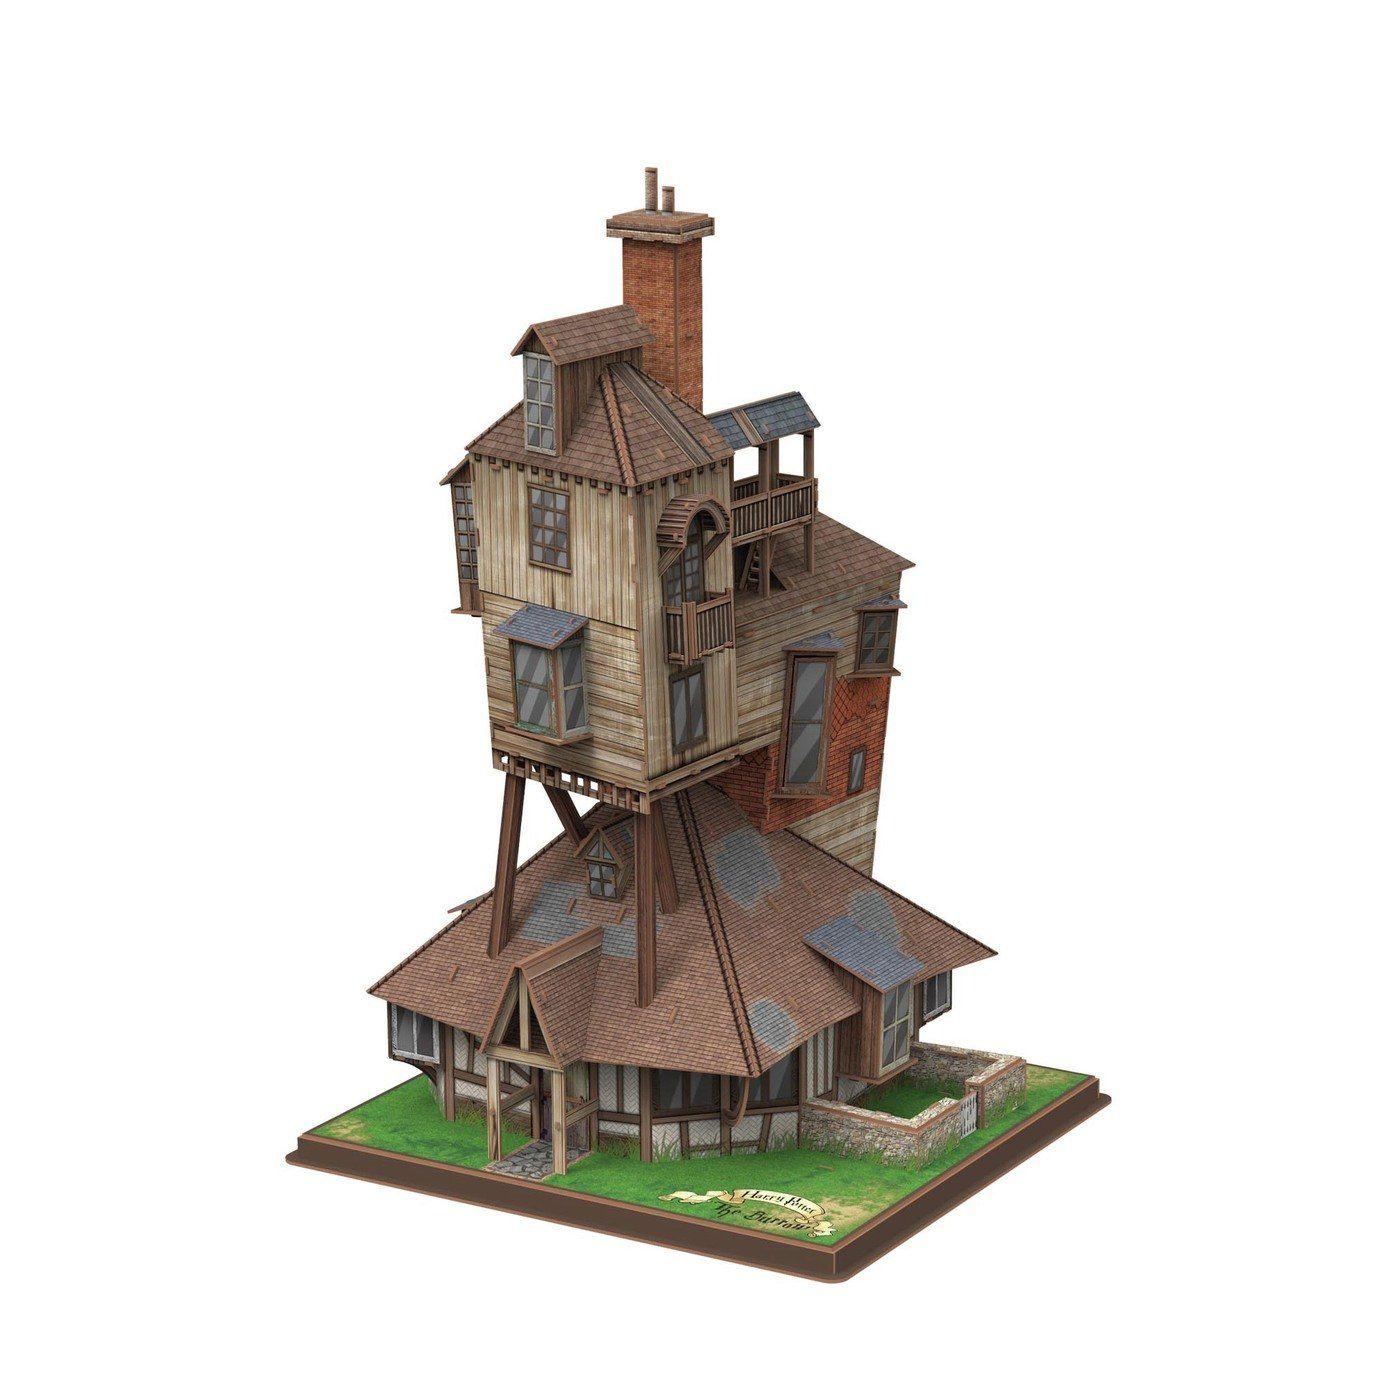 Rickety, multi-level house called The Burrow from Harry Potter movies.